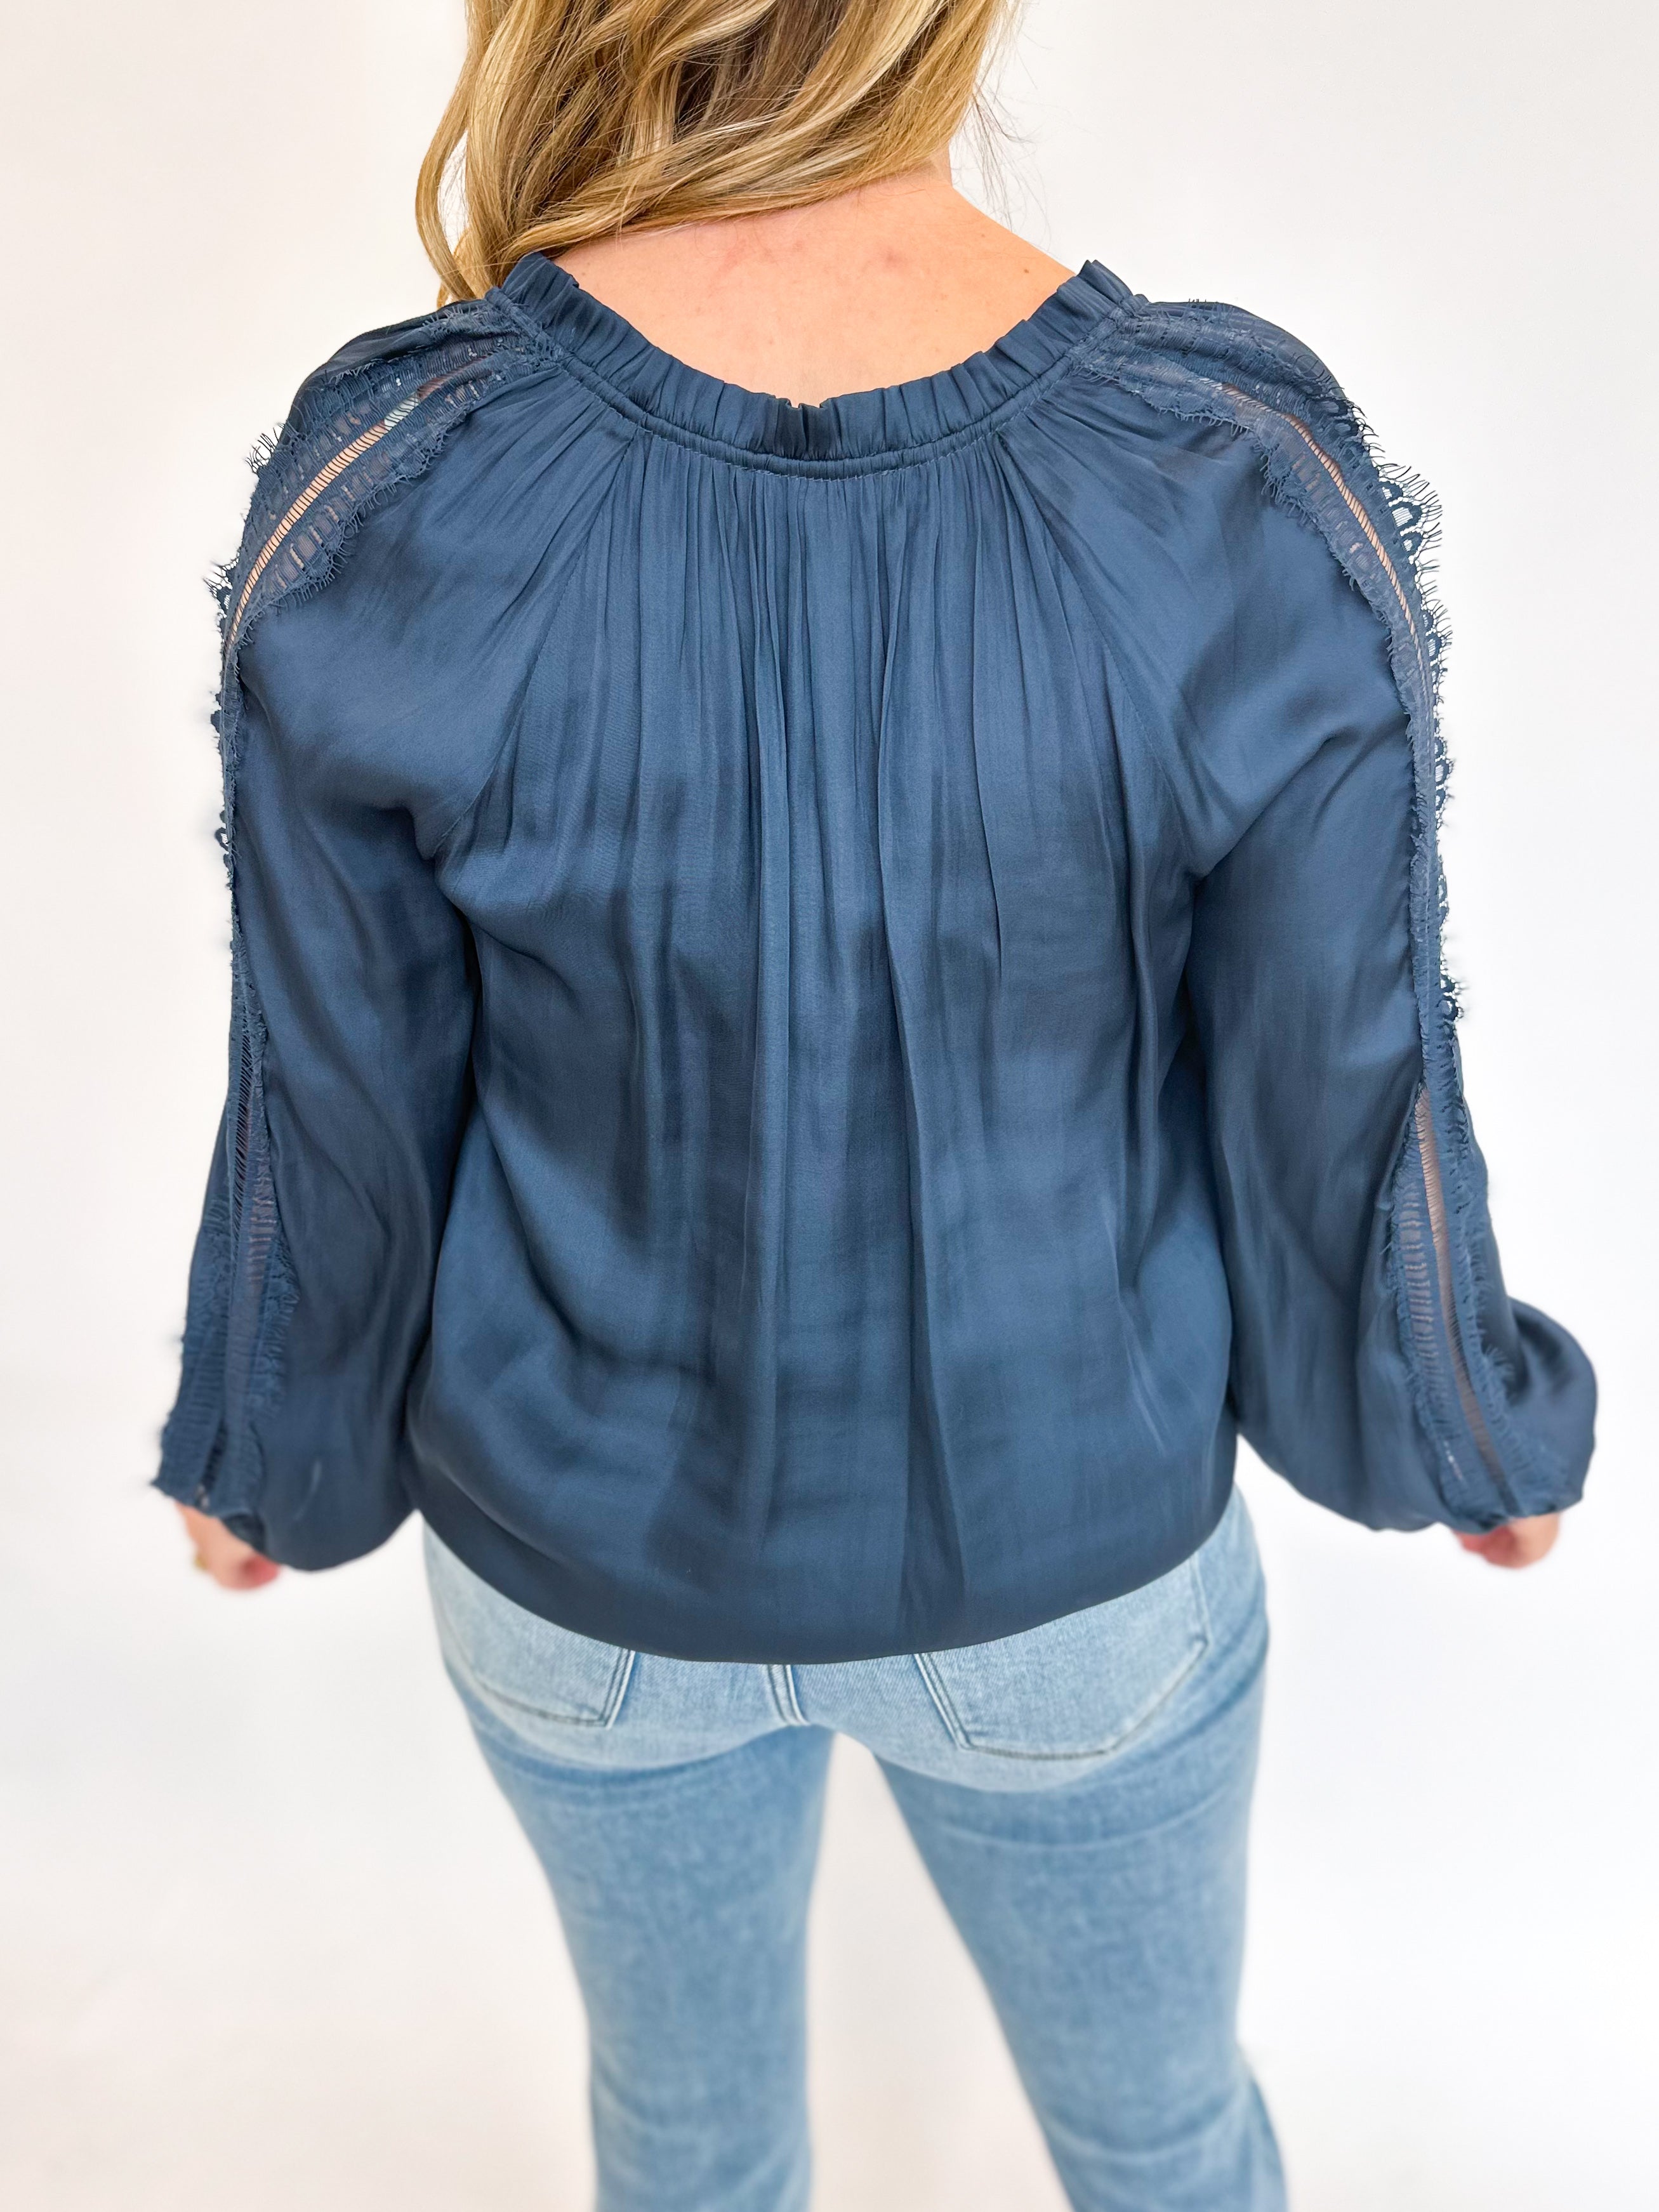 Lacey Details Blouse - True Blue-200 Fashion Blouses-CURRENT AIR CLOTHING-July & June Women's Fashion Boutique Located in San Antonio, Texas